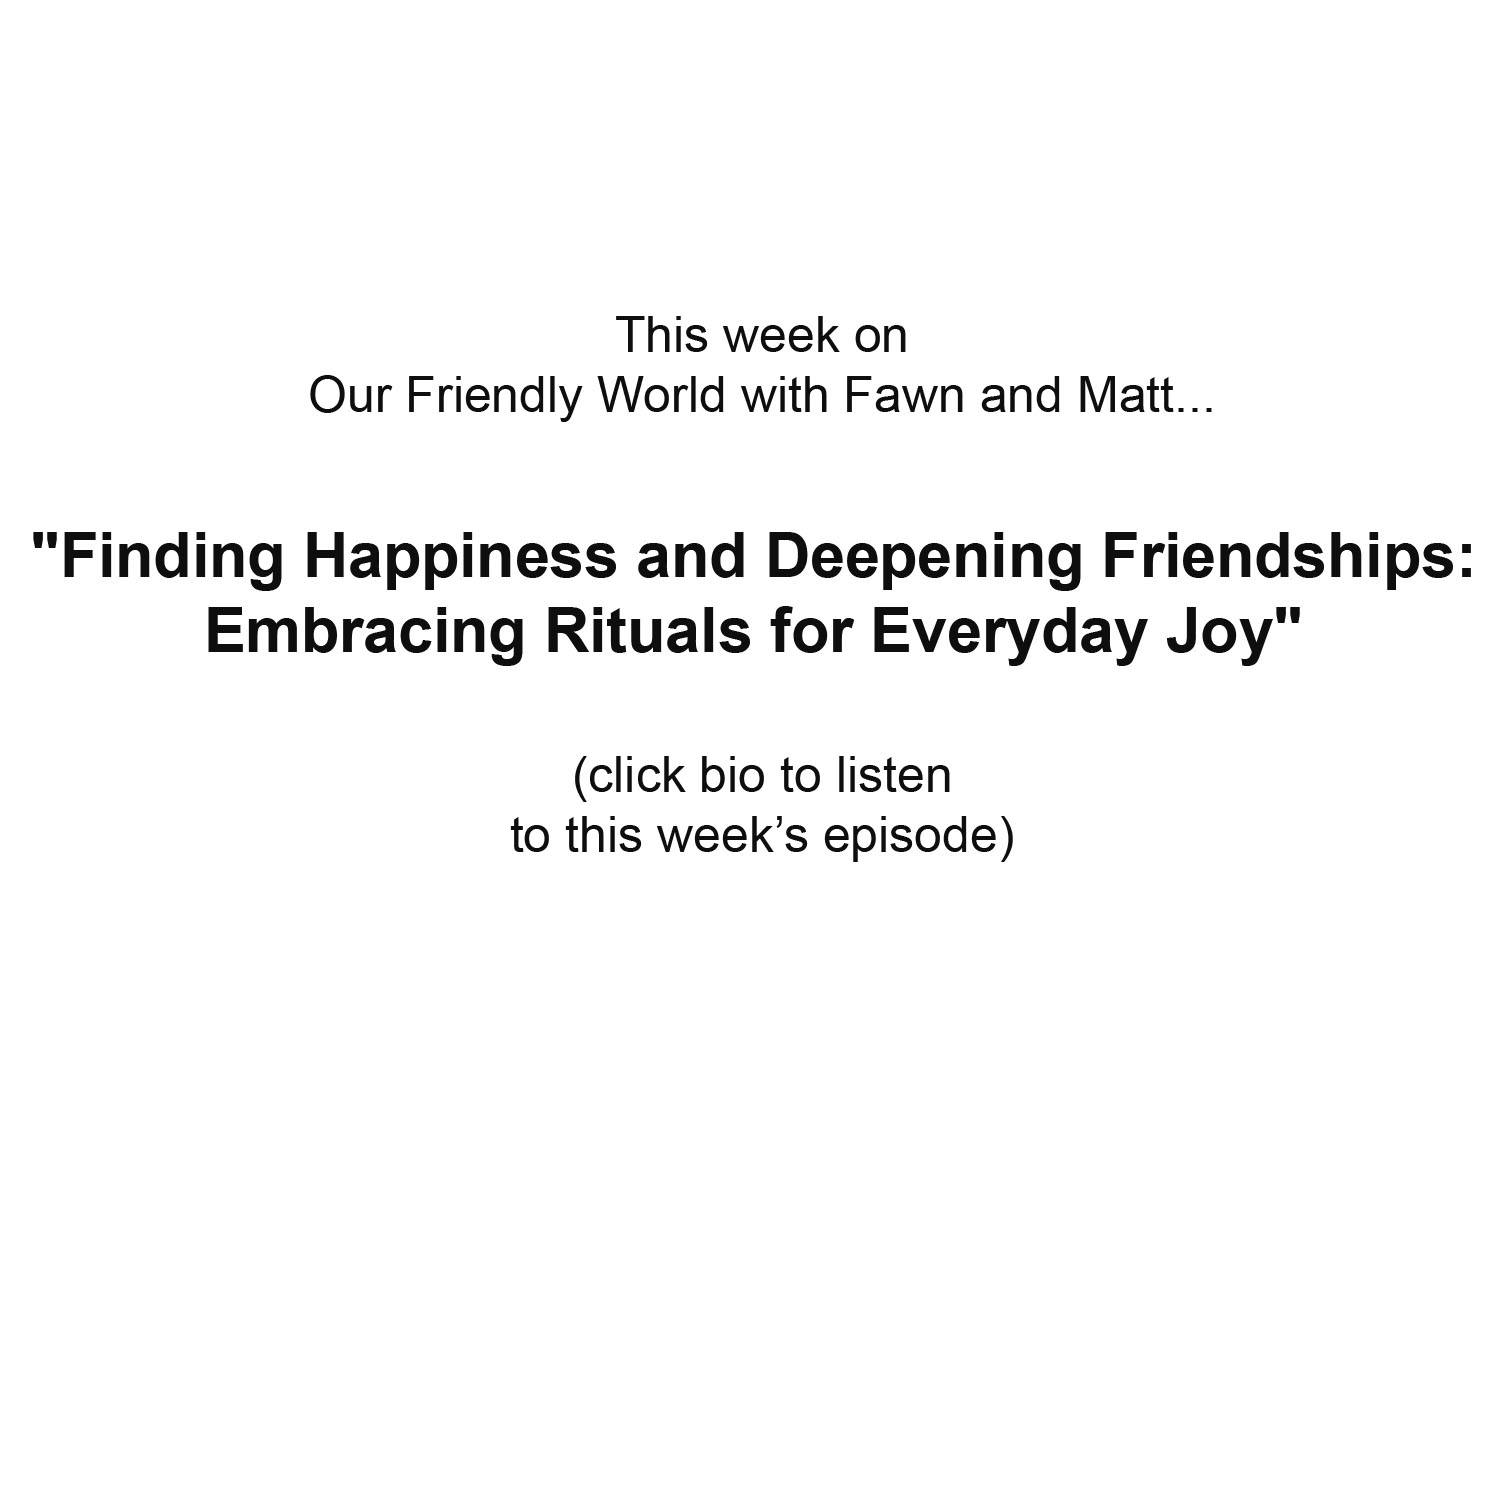 "Finding Happiness and Deepening Friendships: Embracing Rituals for Everyday Joy"